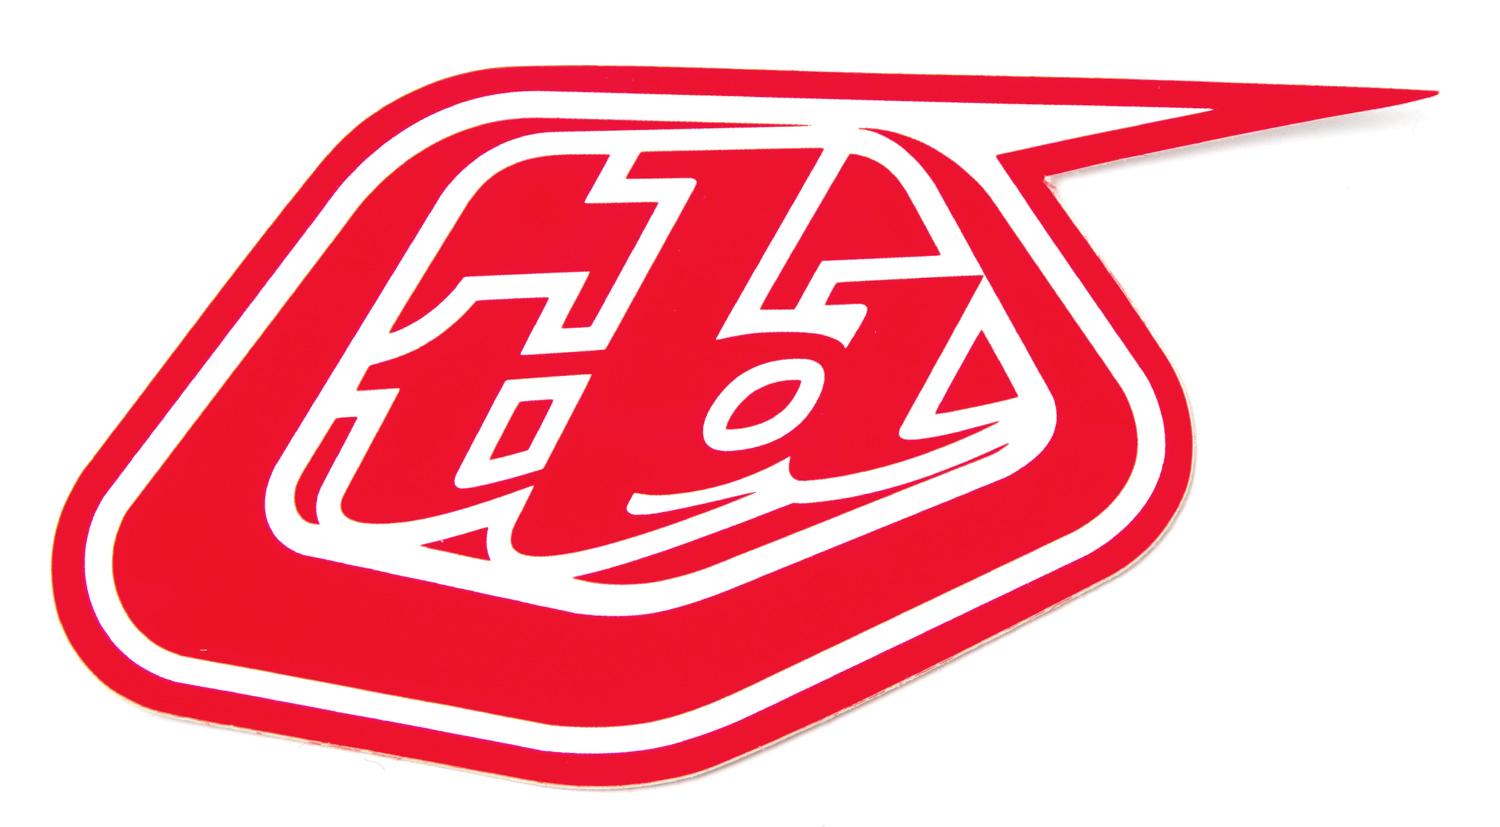 Red Troy Logo - Troy Lee Designs Sticker Shield Red - 6 inches | Maciag Offroad